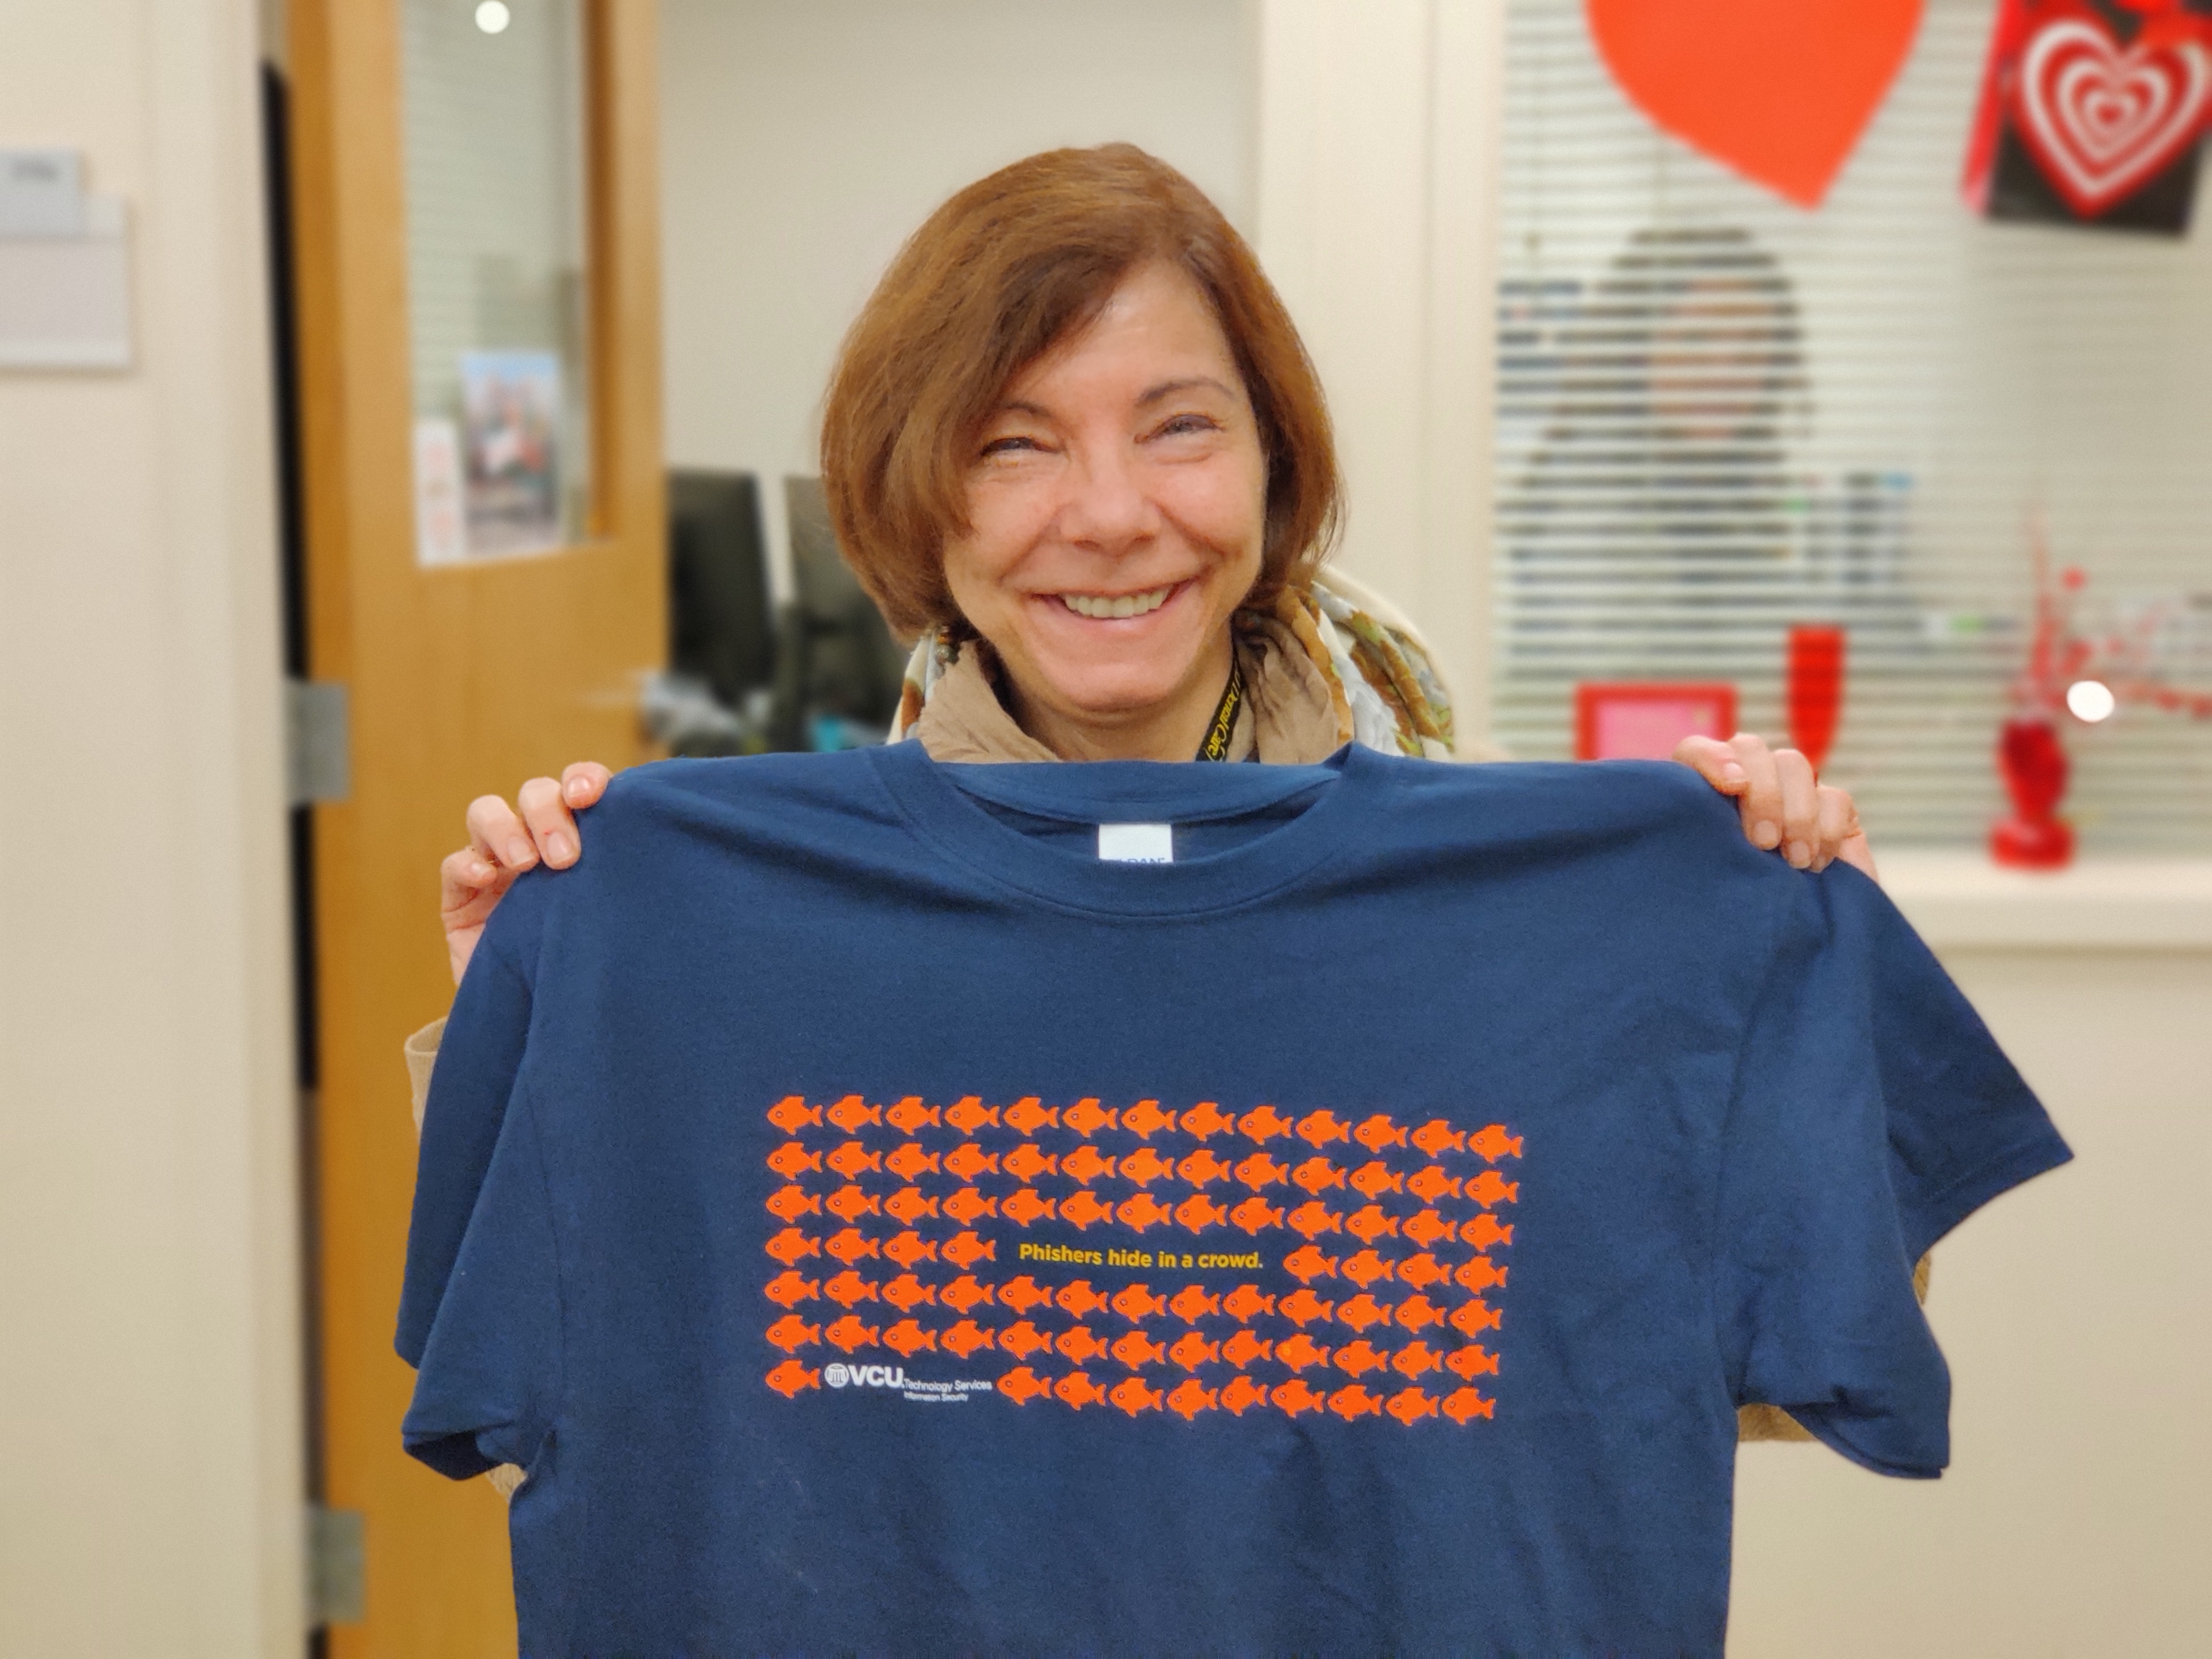 Photo of Louise Wenzell holding a phishers hide in a crowd tee.